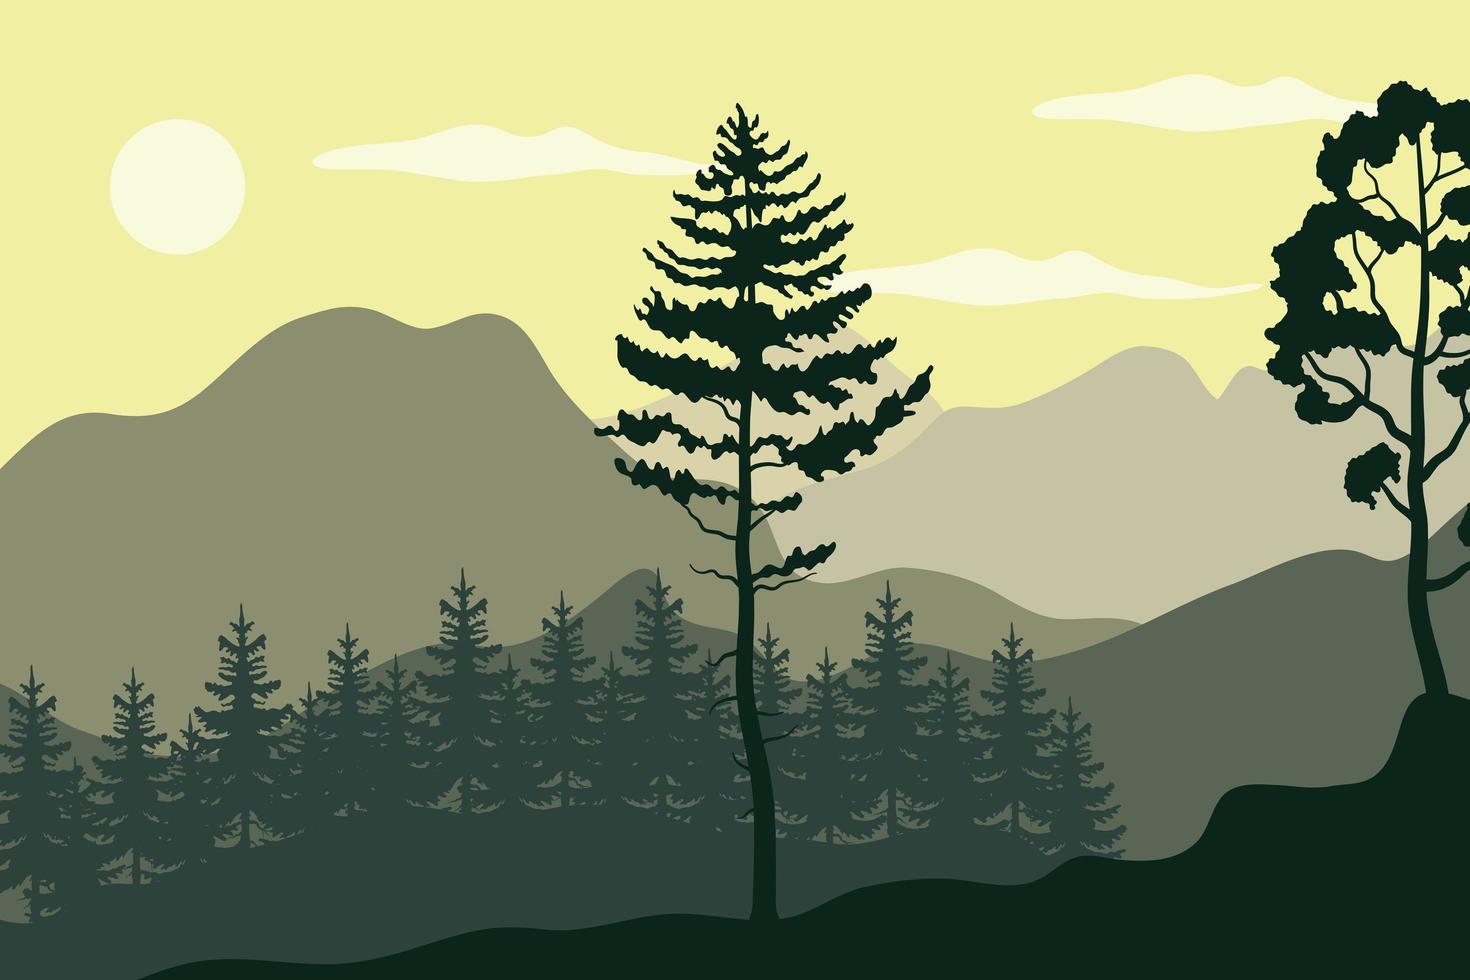 pines trees plants in forest landscape scene vector